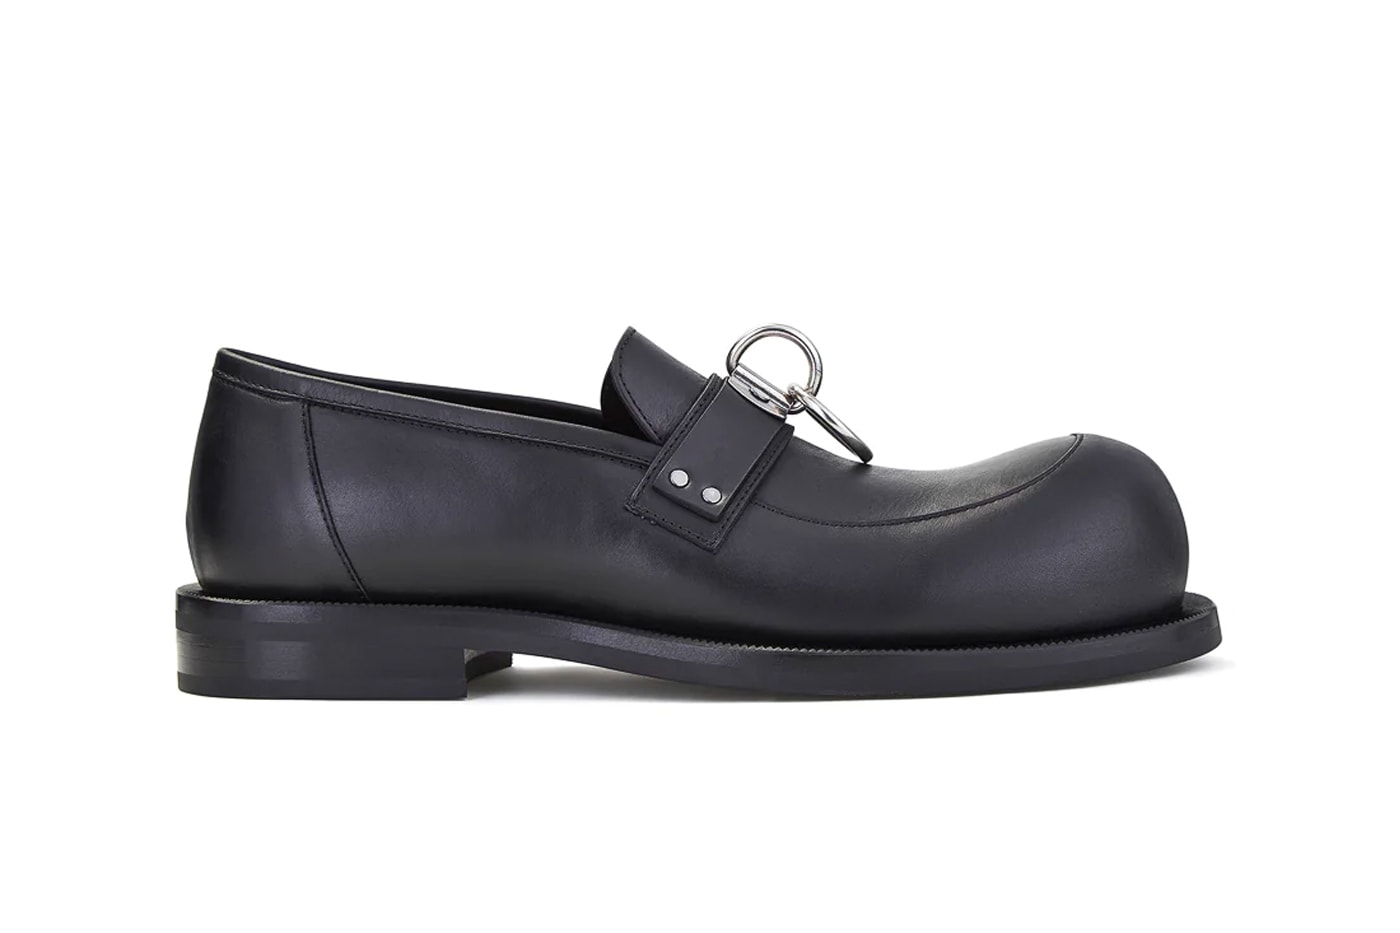 Martine Rose SS23 Bulb Toe Ring Loafers in Black Info Price Buy Now